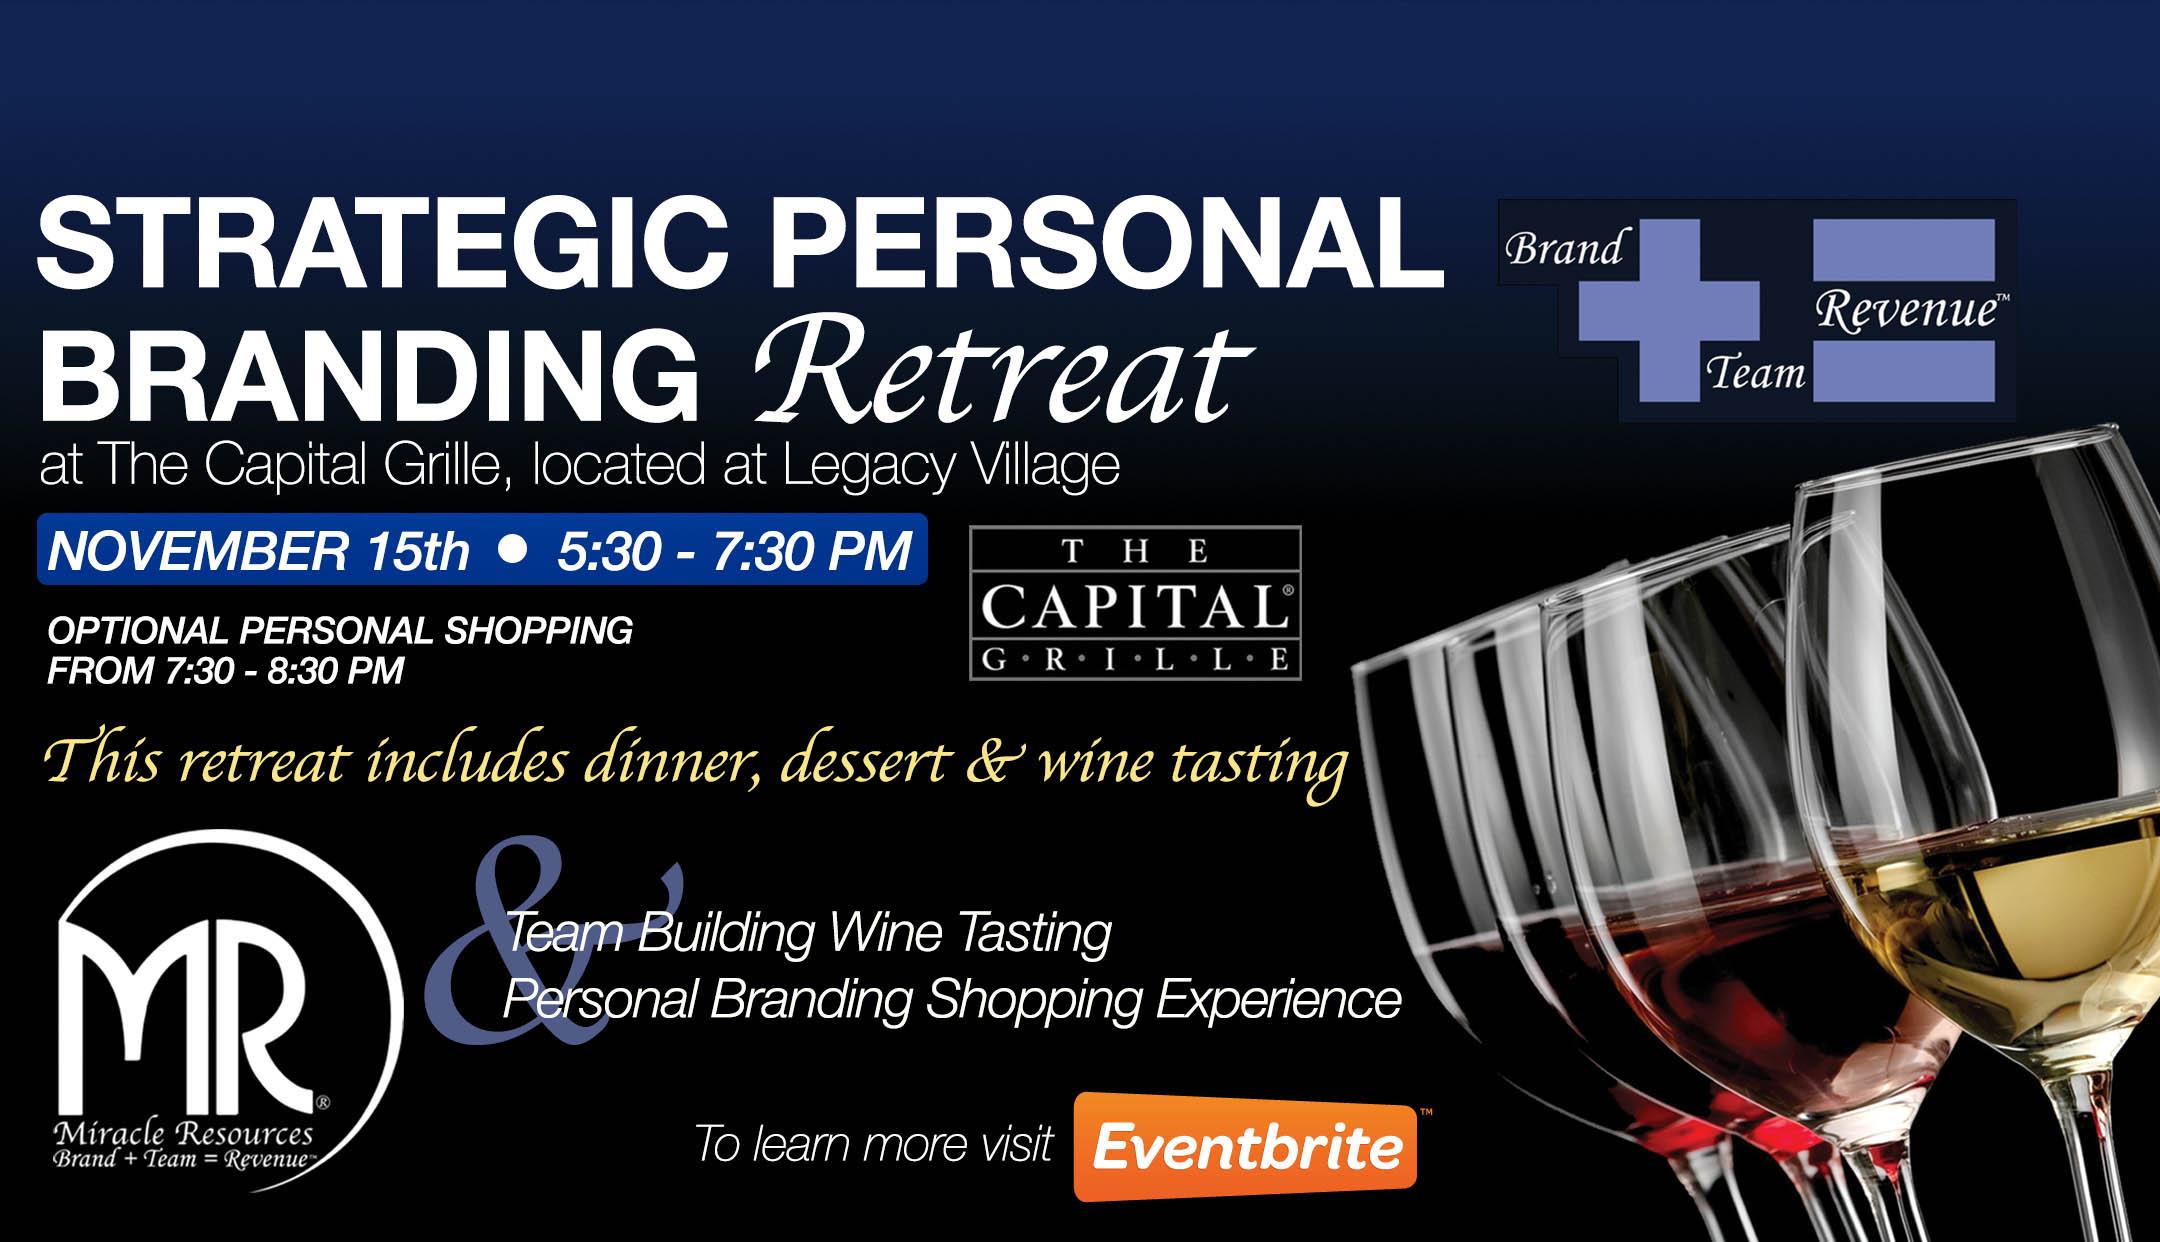 Personal Branding Retreat Dinner & Wine Tasting with Shopping Experience